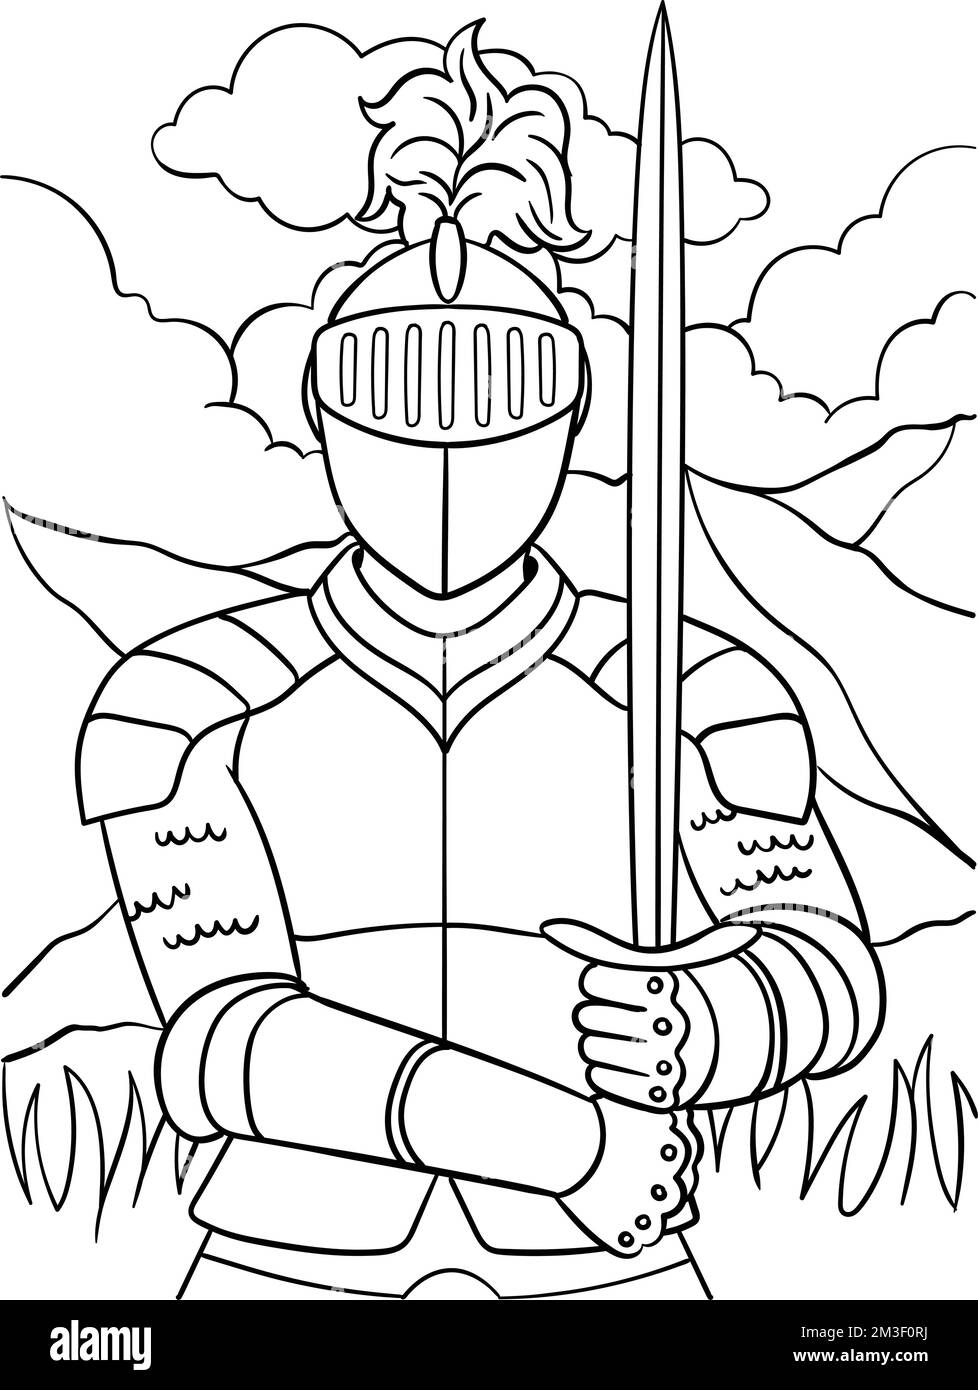 knights in armour coloring pages